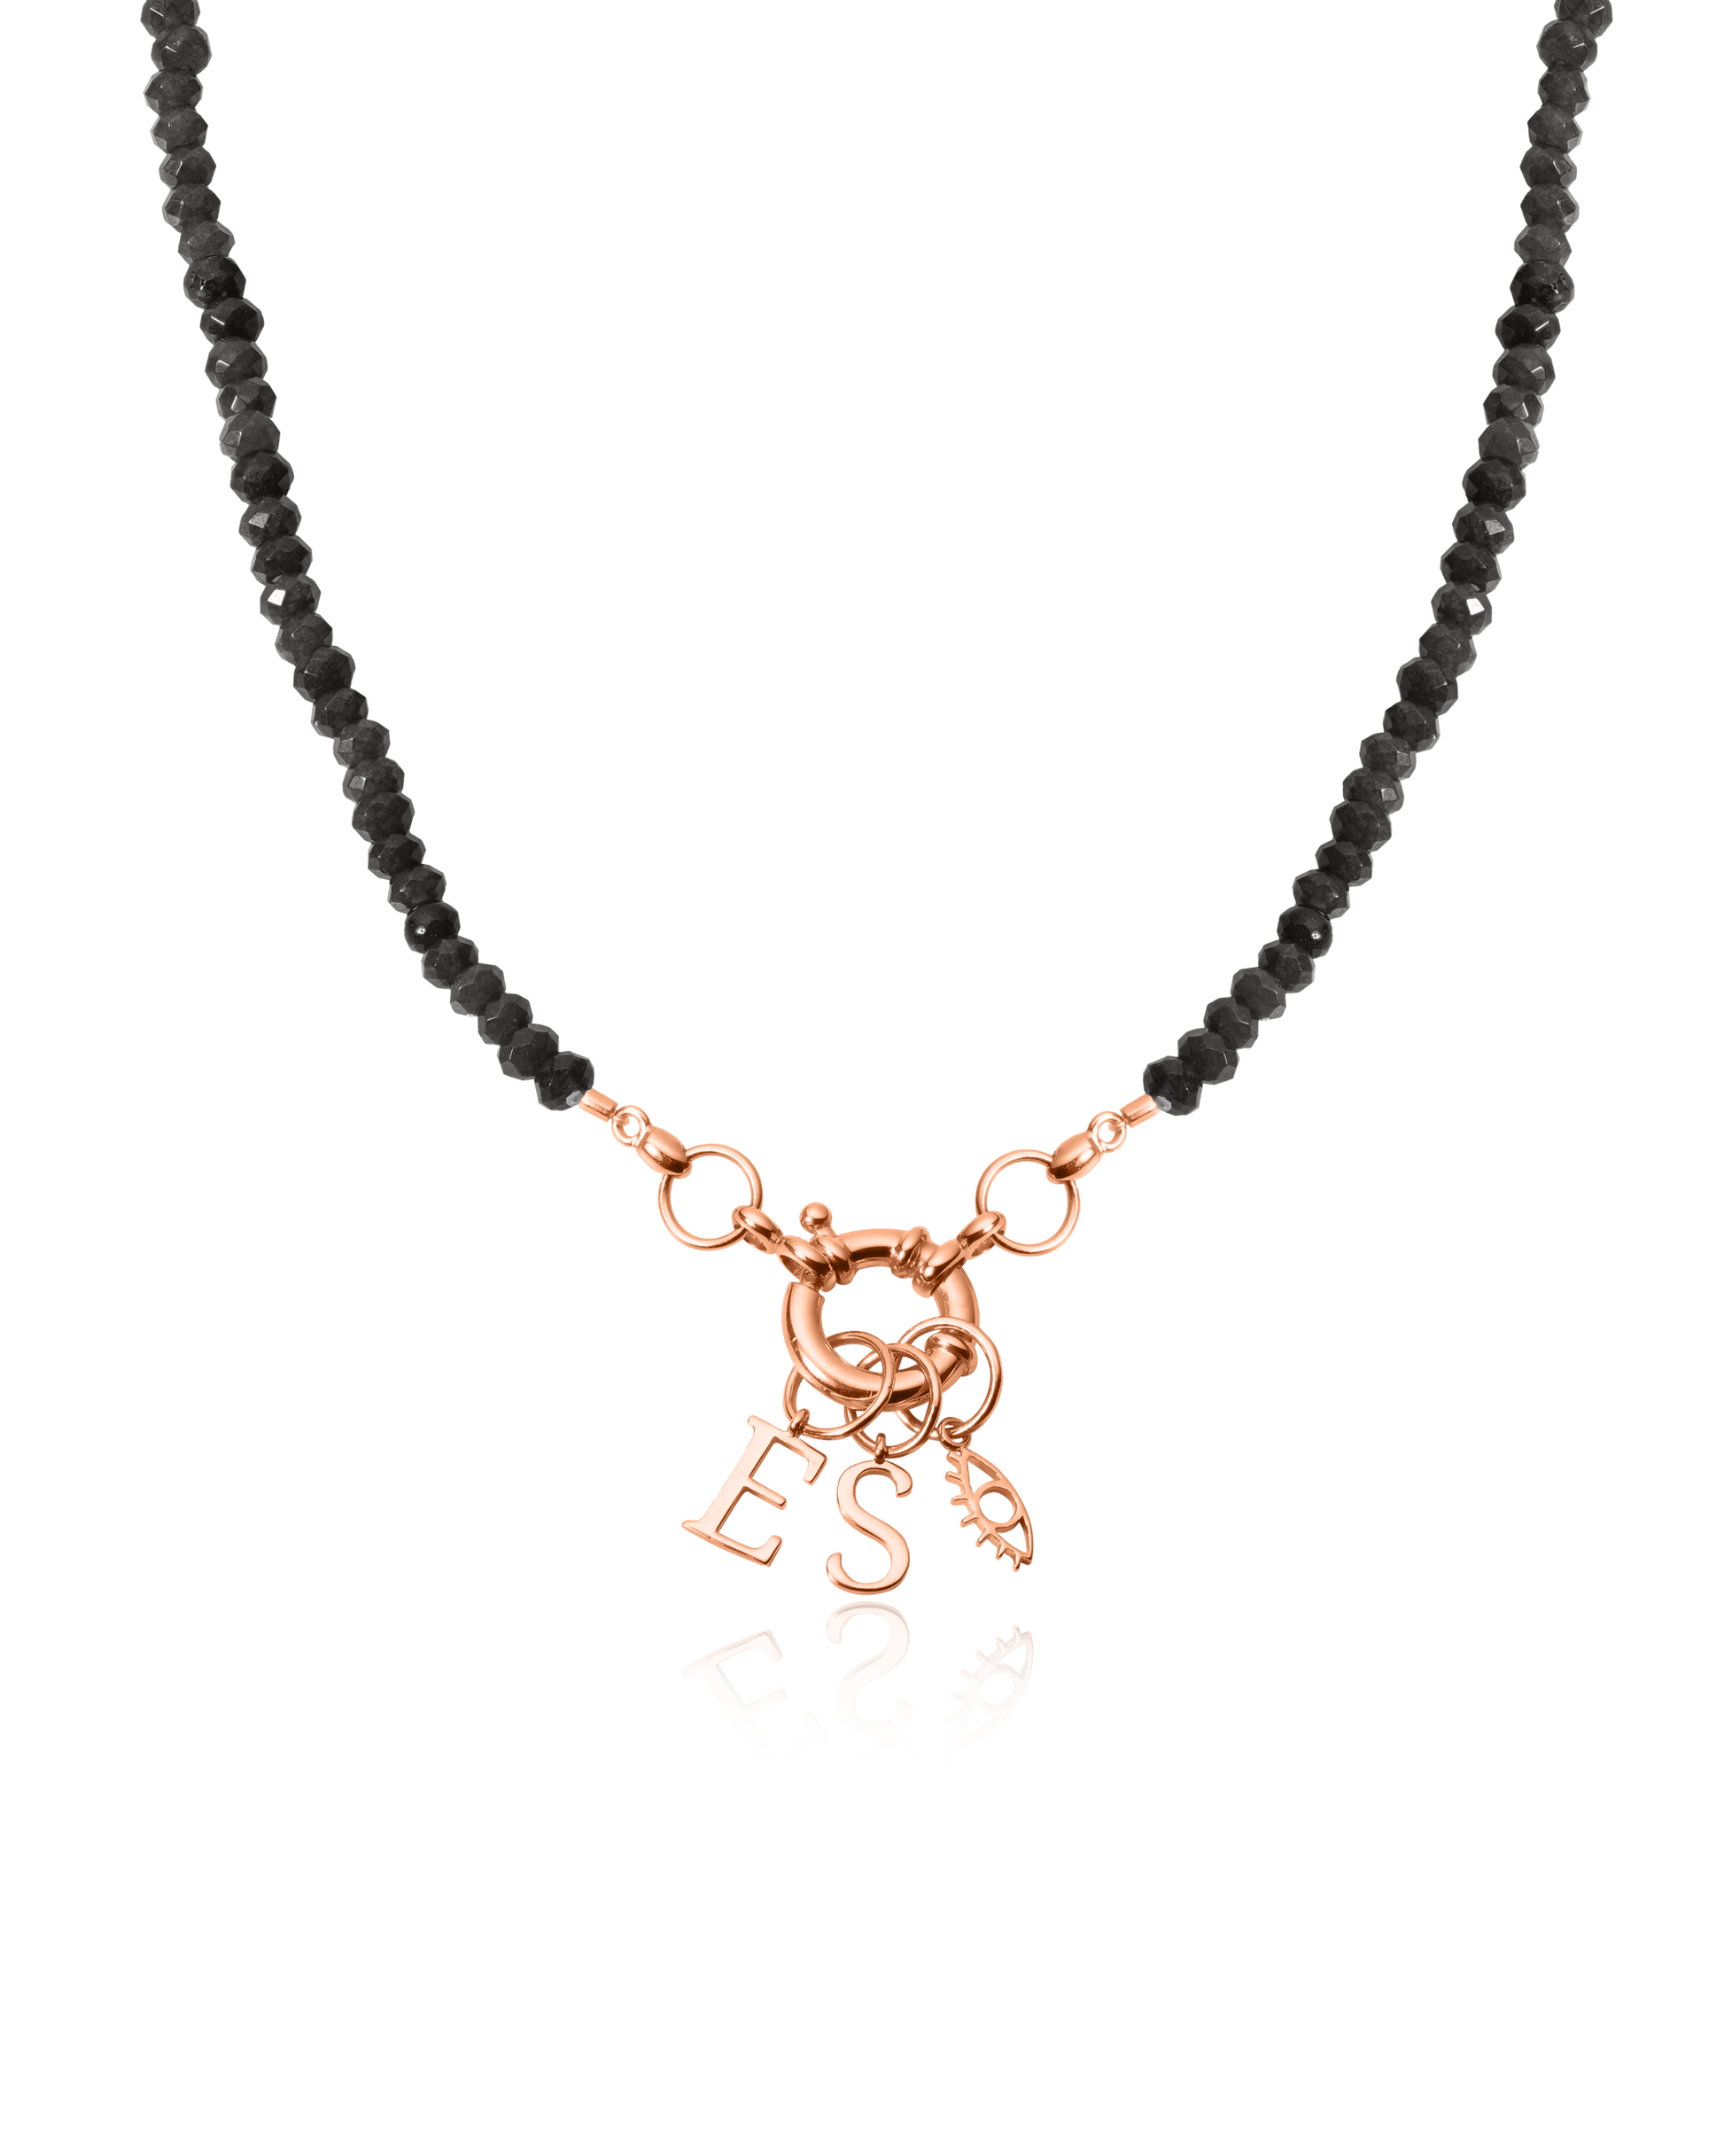 Pearl Charm Lock Necklace - 18K Rose Vermeil Necklaces magal-dev Glass Beads Black Spinnel 1 Charm 16"